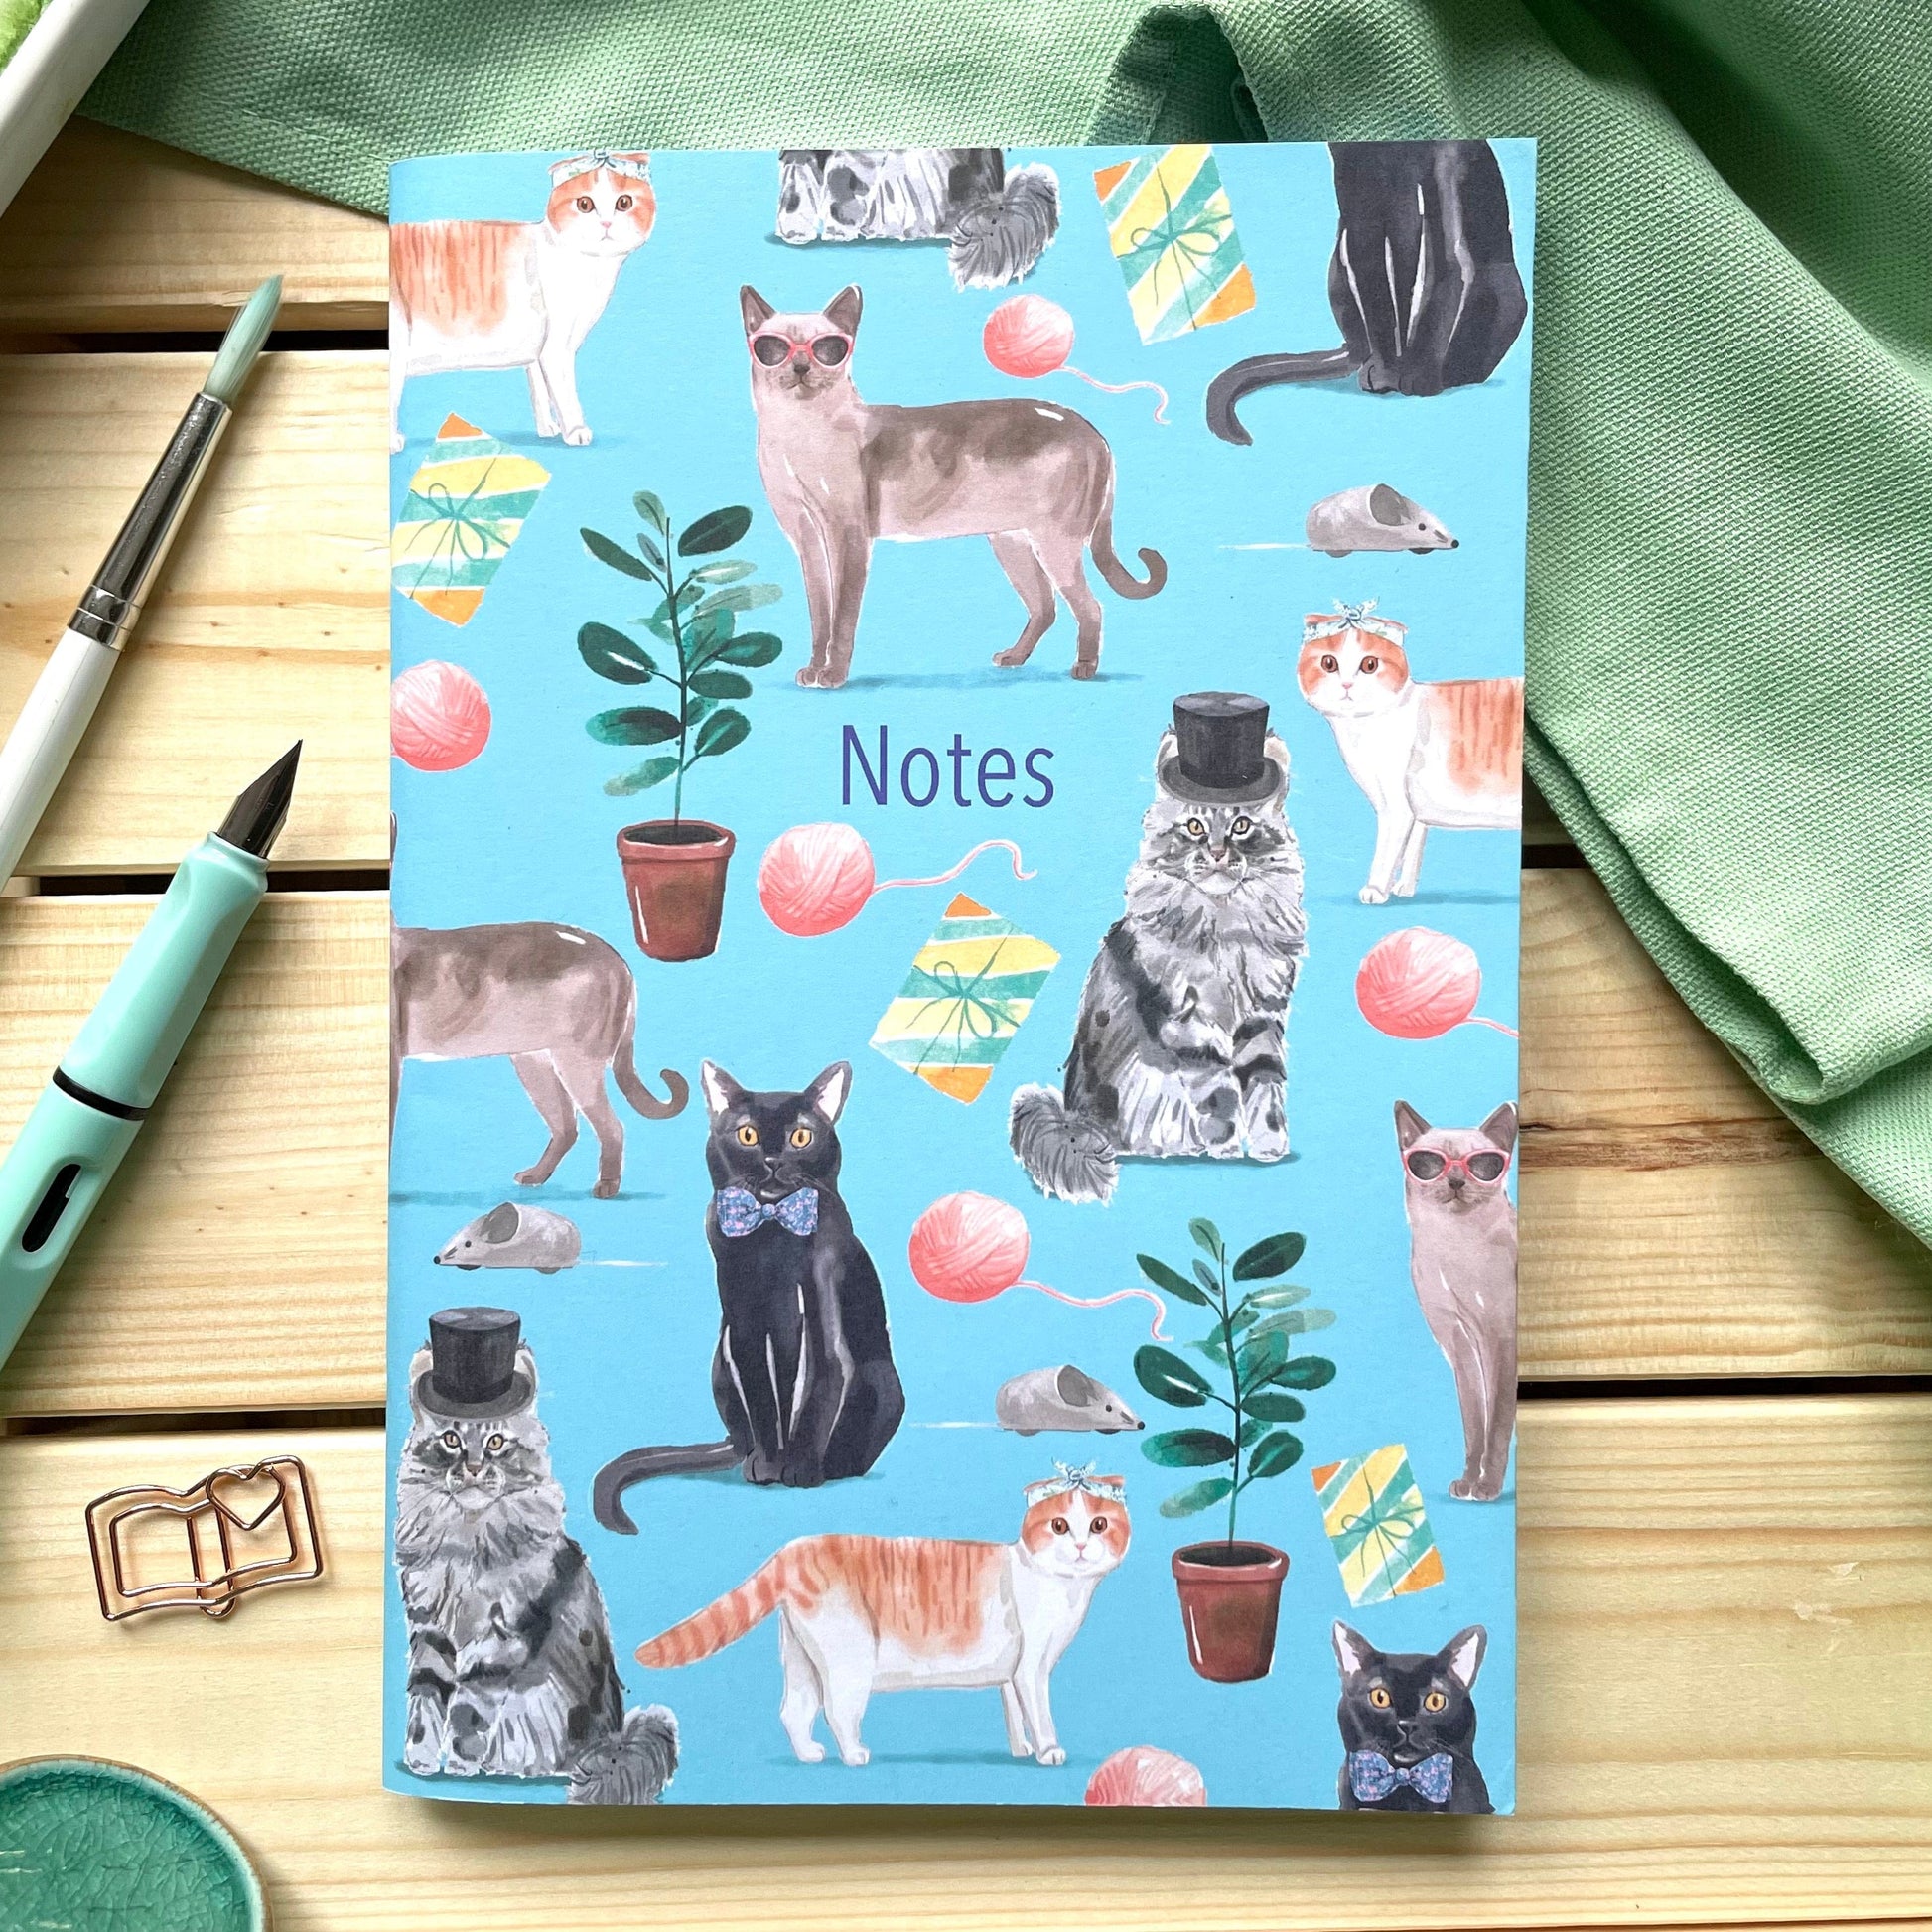 And Hope Designs Notebook Cool cats A5 lined notebook